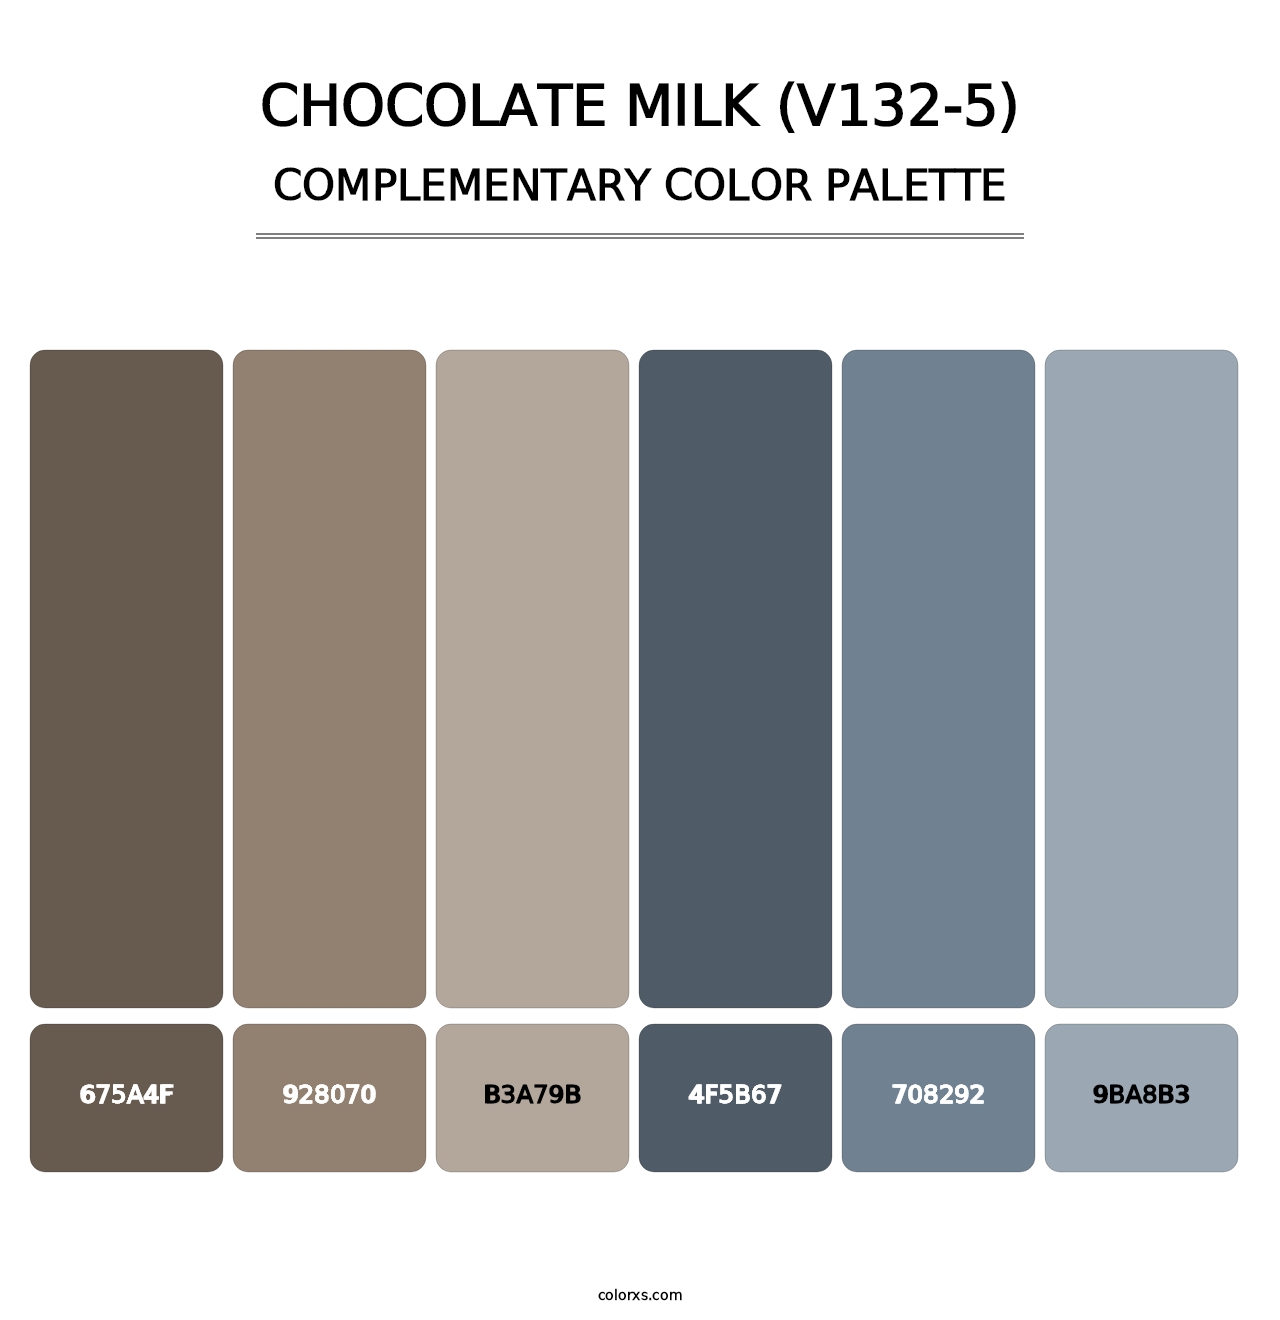 Chocolate Milk (V132-5) - Complementary Color Palette